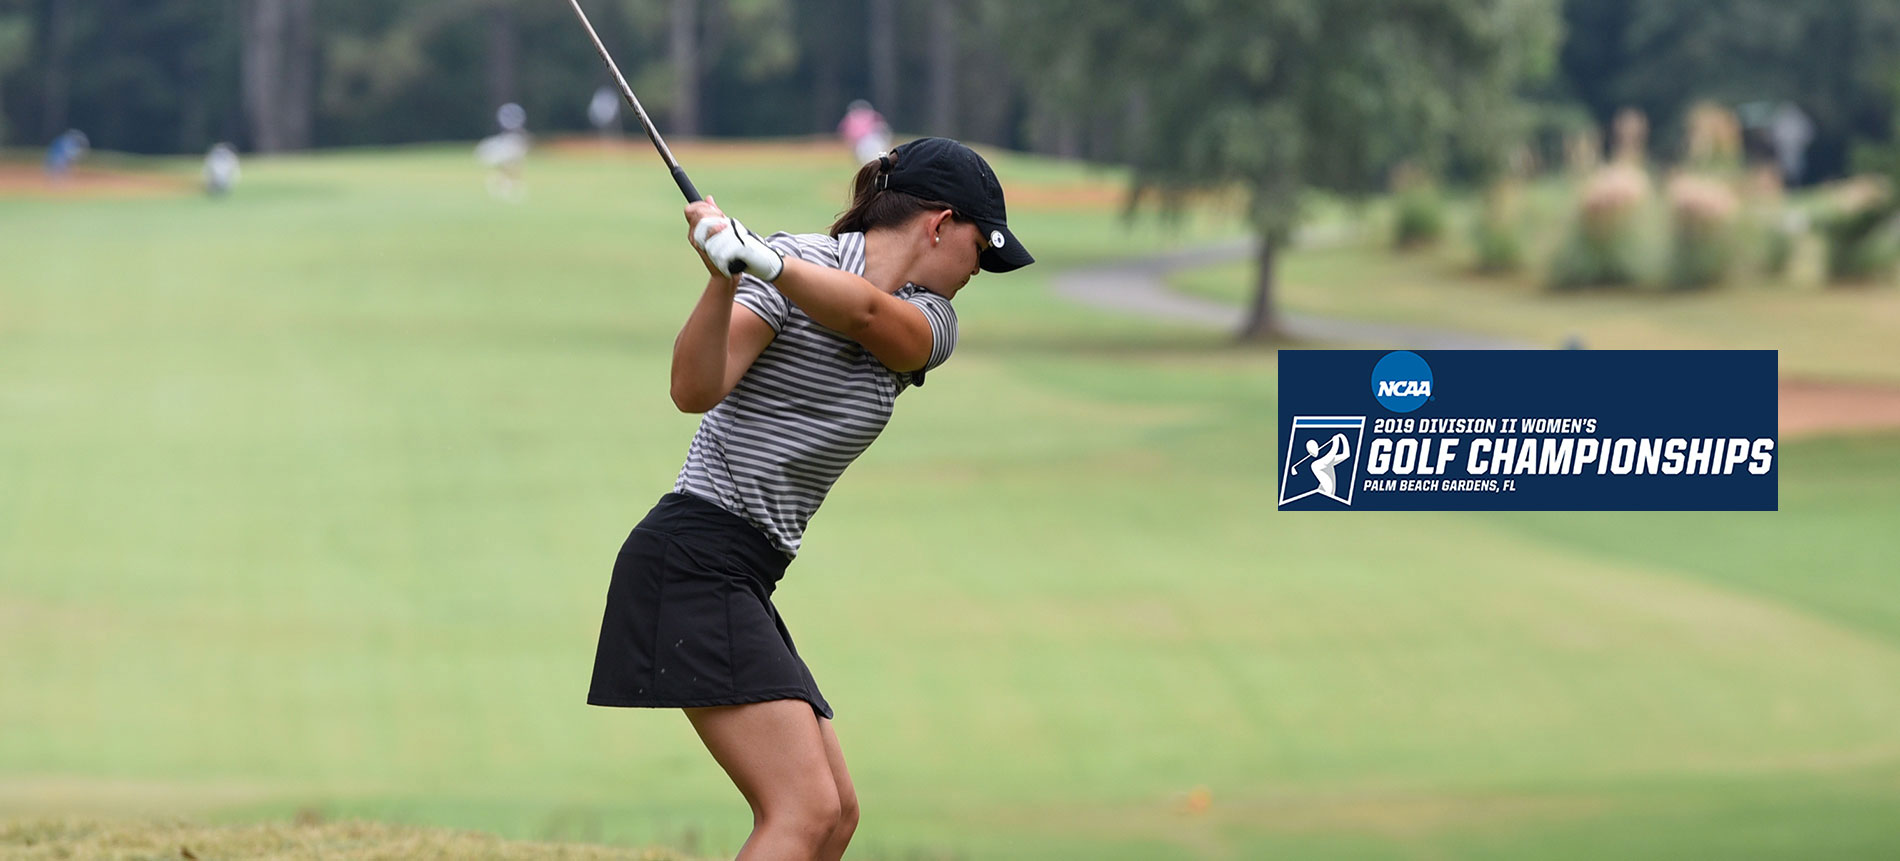 Hall Tied for 57th Place Following Opening Round of NCAA Women’s Golf Championships